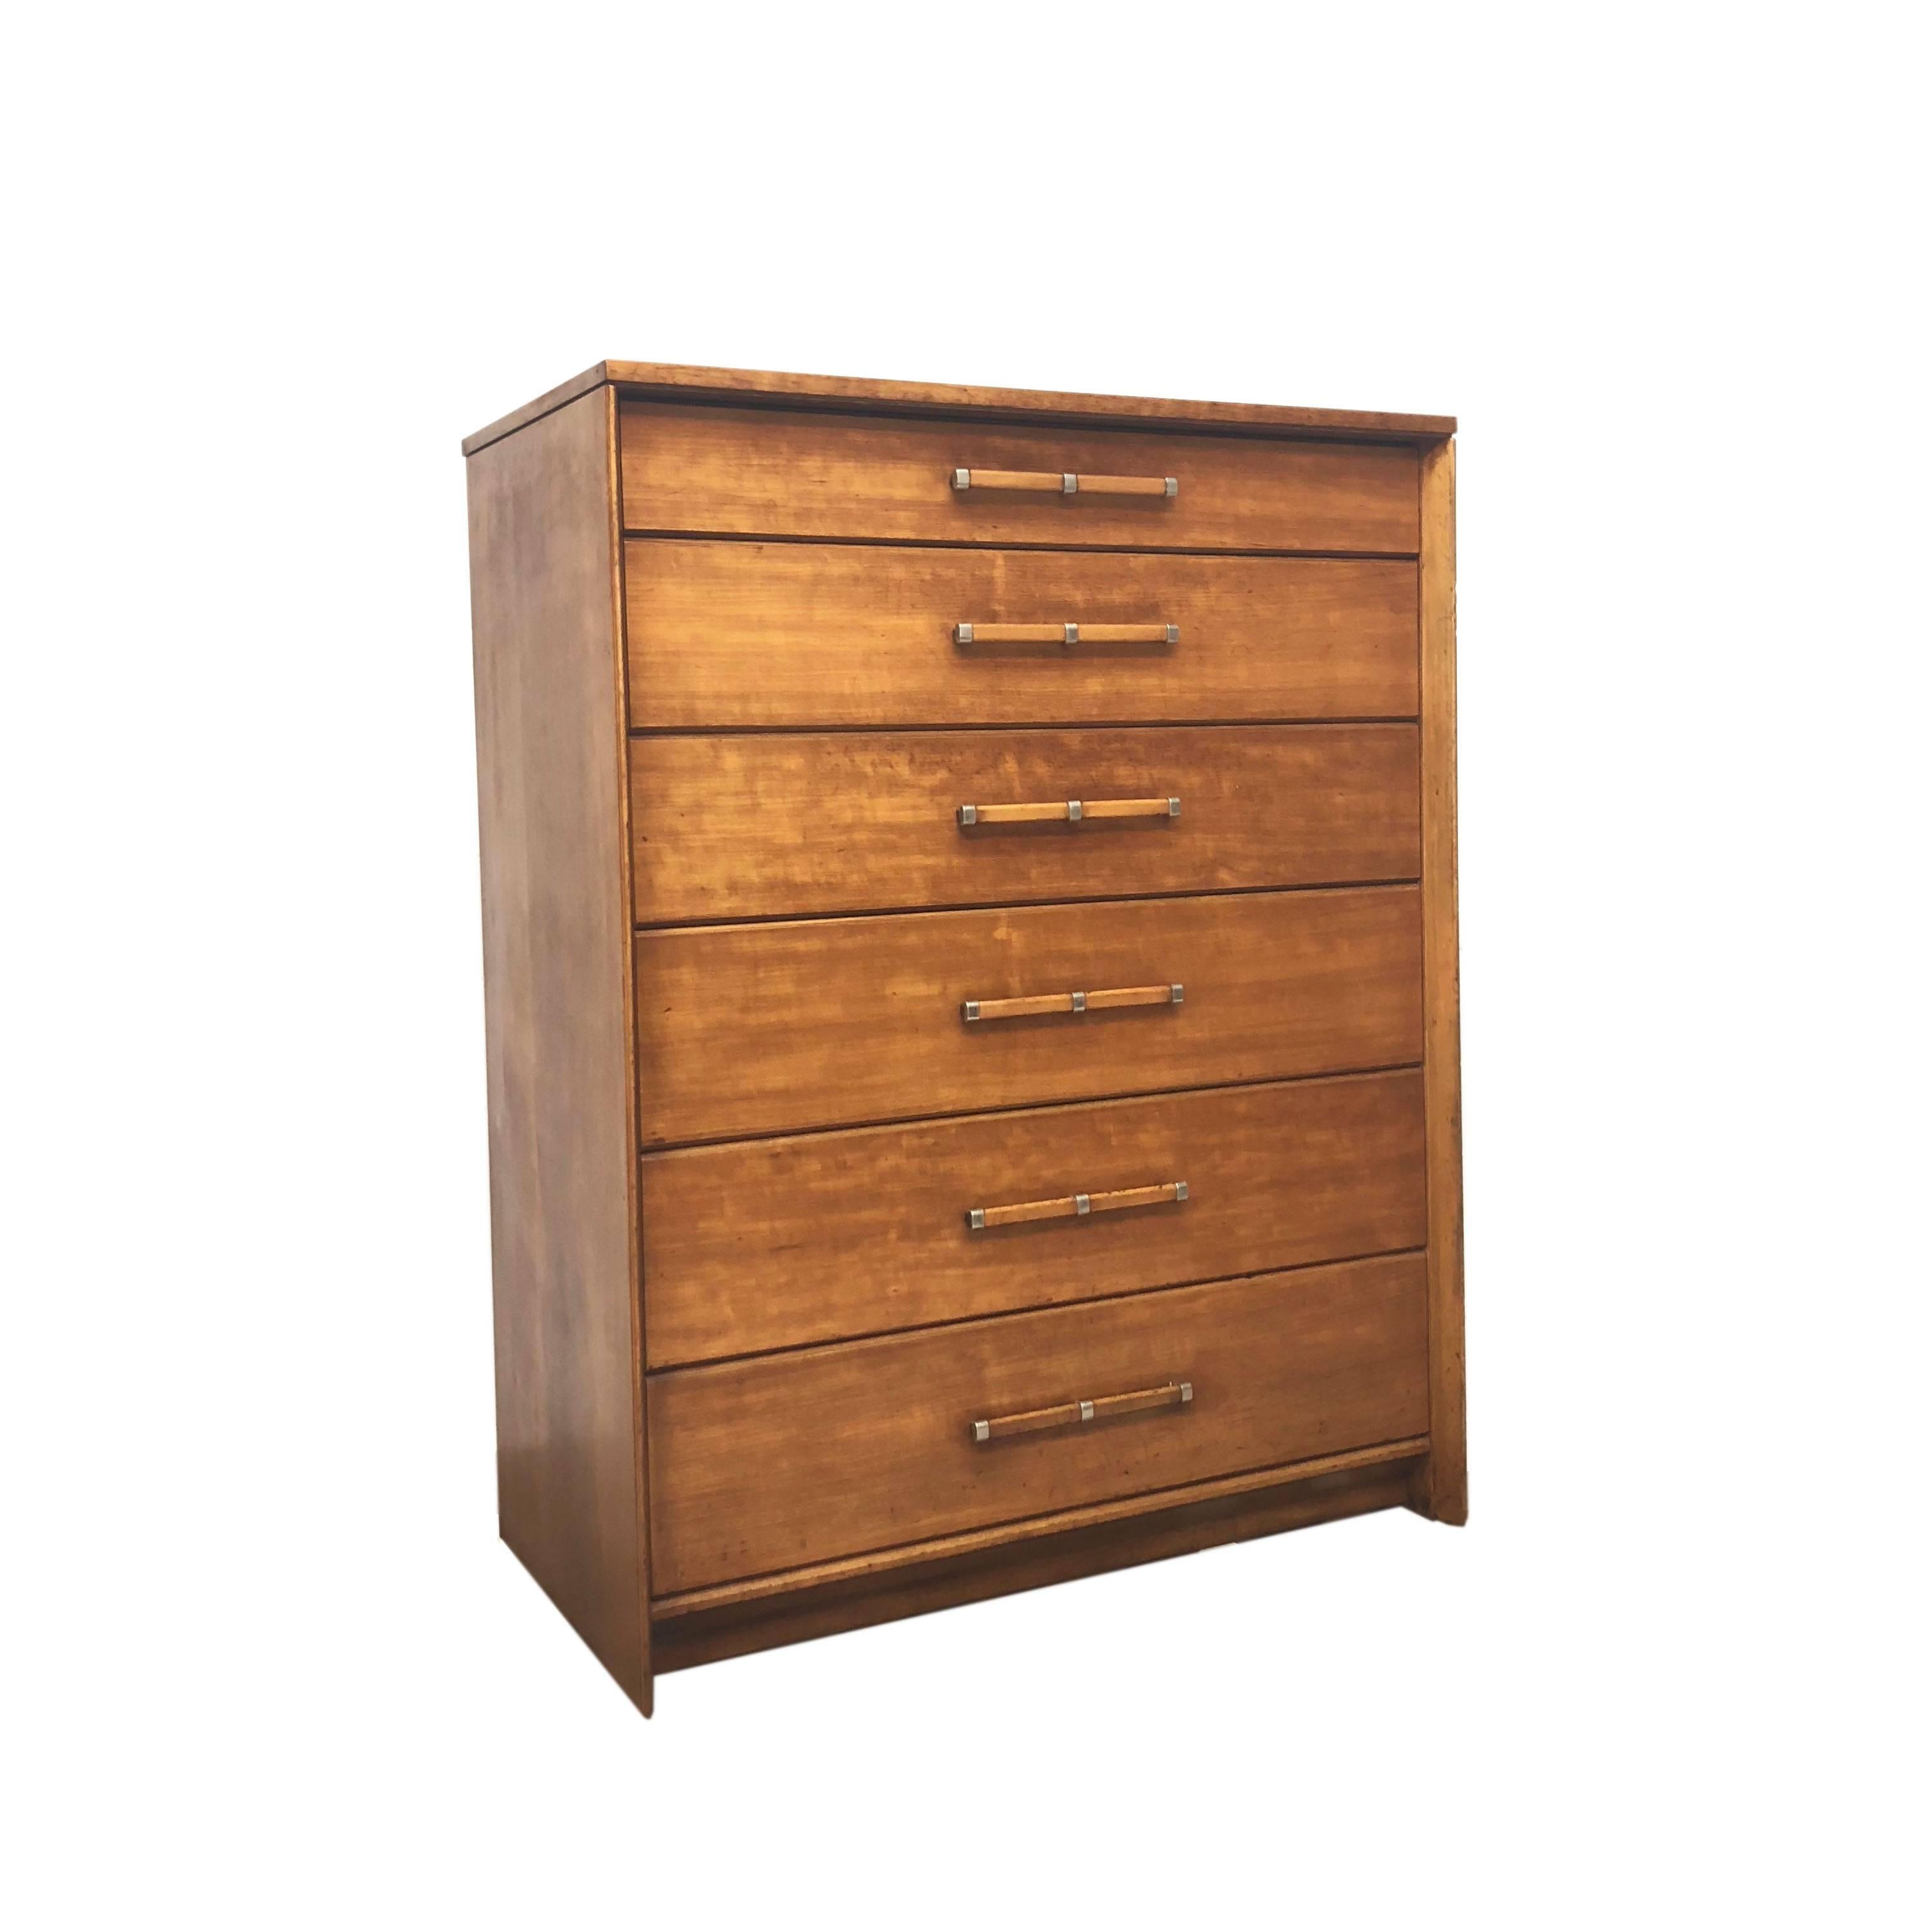 Mid-Century Modern six-drawer dresser by John Stuart for Johnson Furniture. Some marking on base as seen in photos. Age appropriate wear.

Measurements: 36